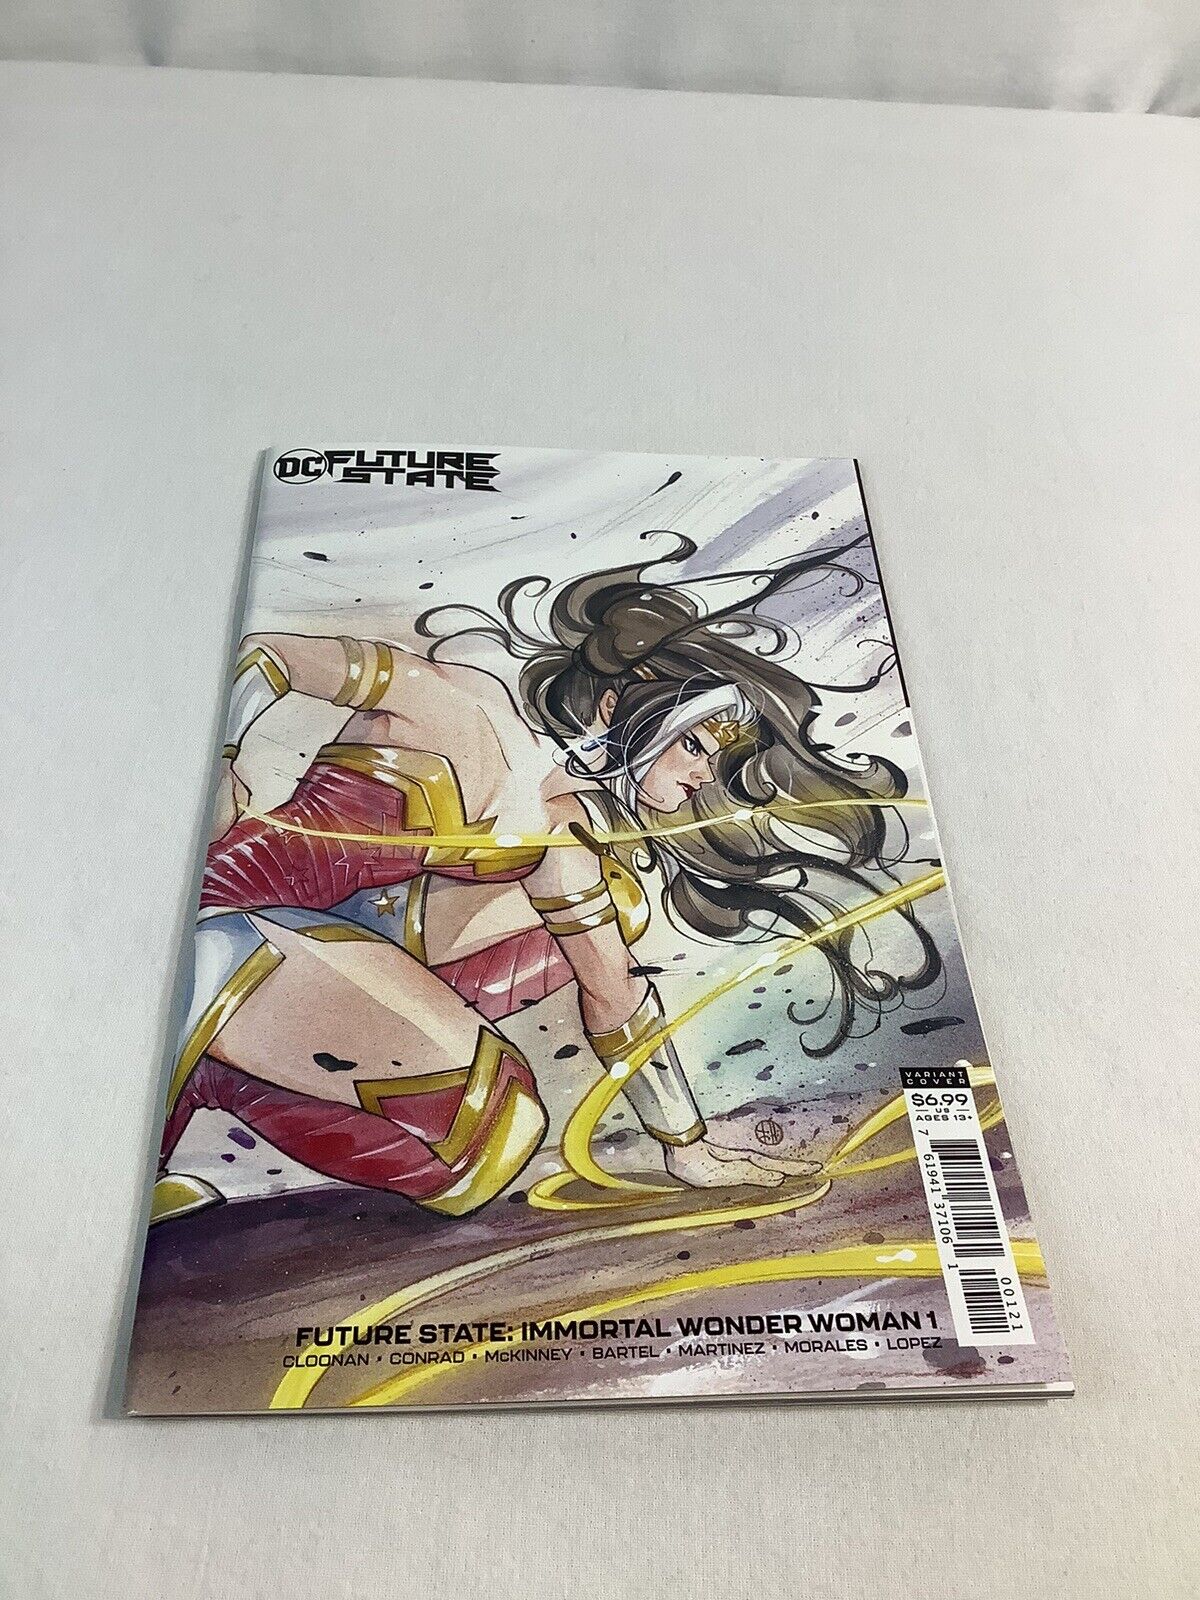 FUTURE STATE: IMMORTAL WONDER WOMAN #1 (VARIANT COVER) DC 2020